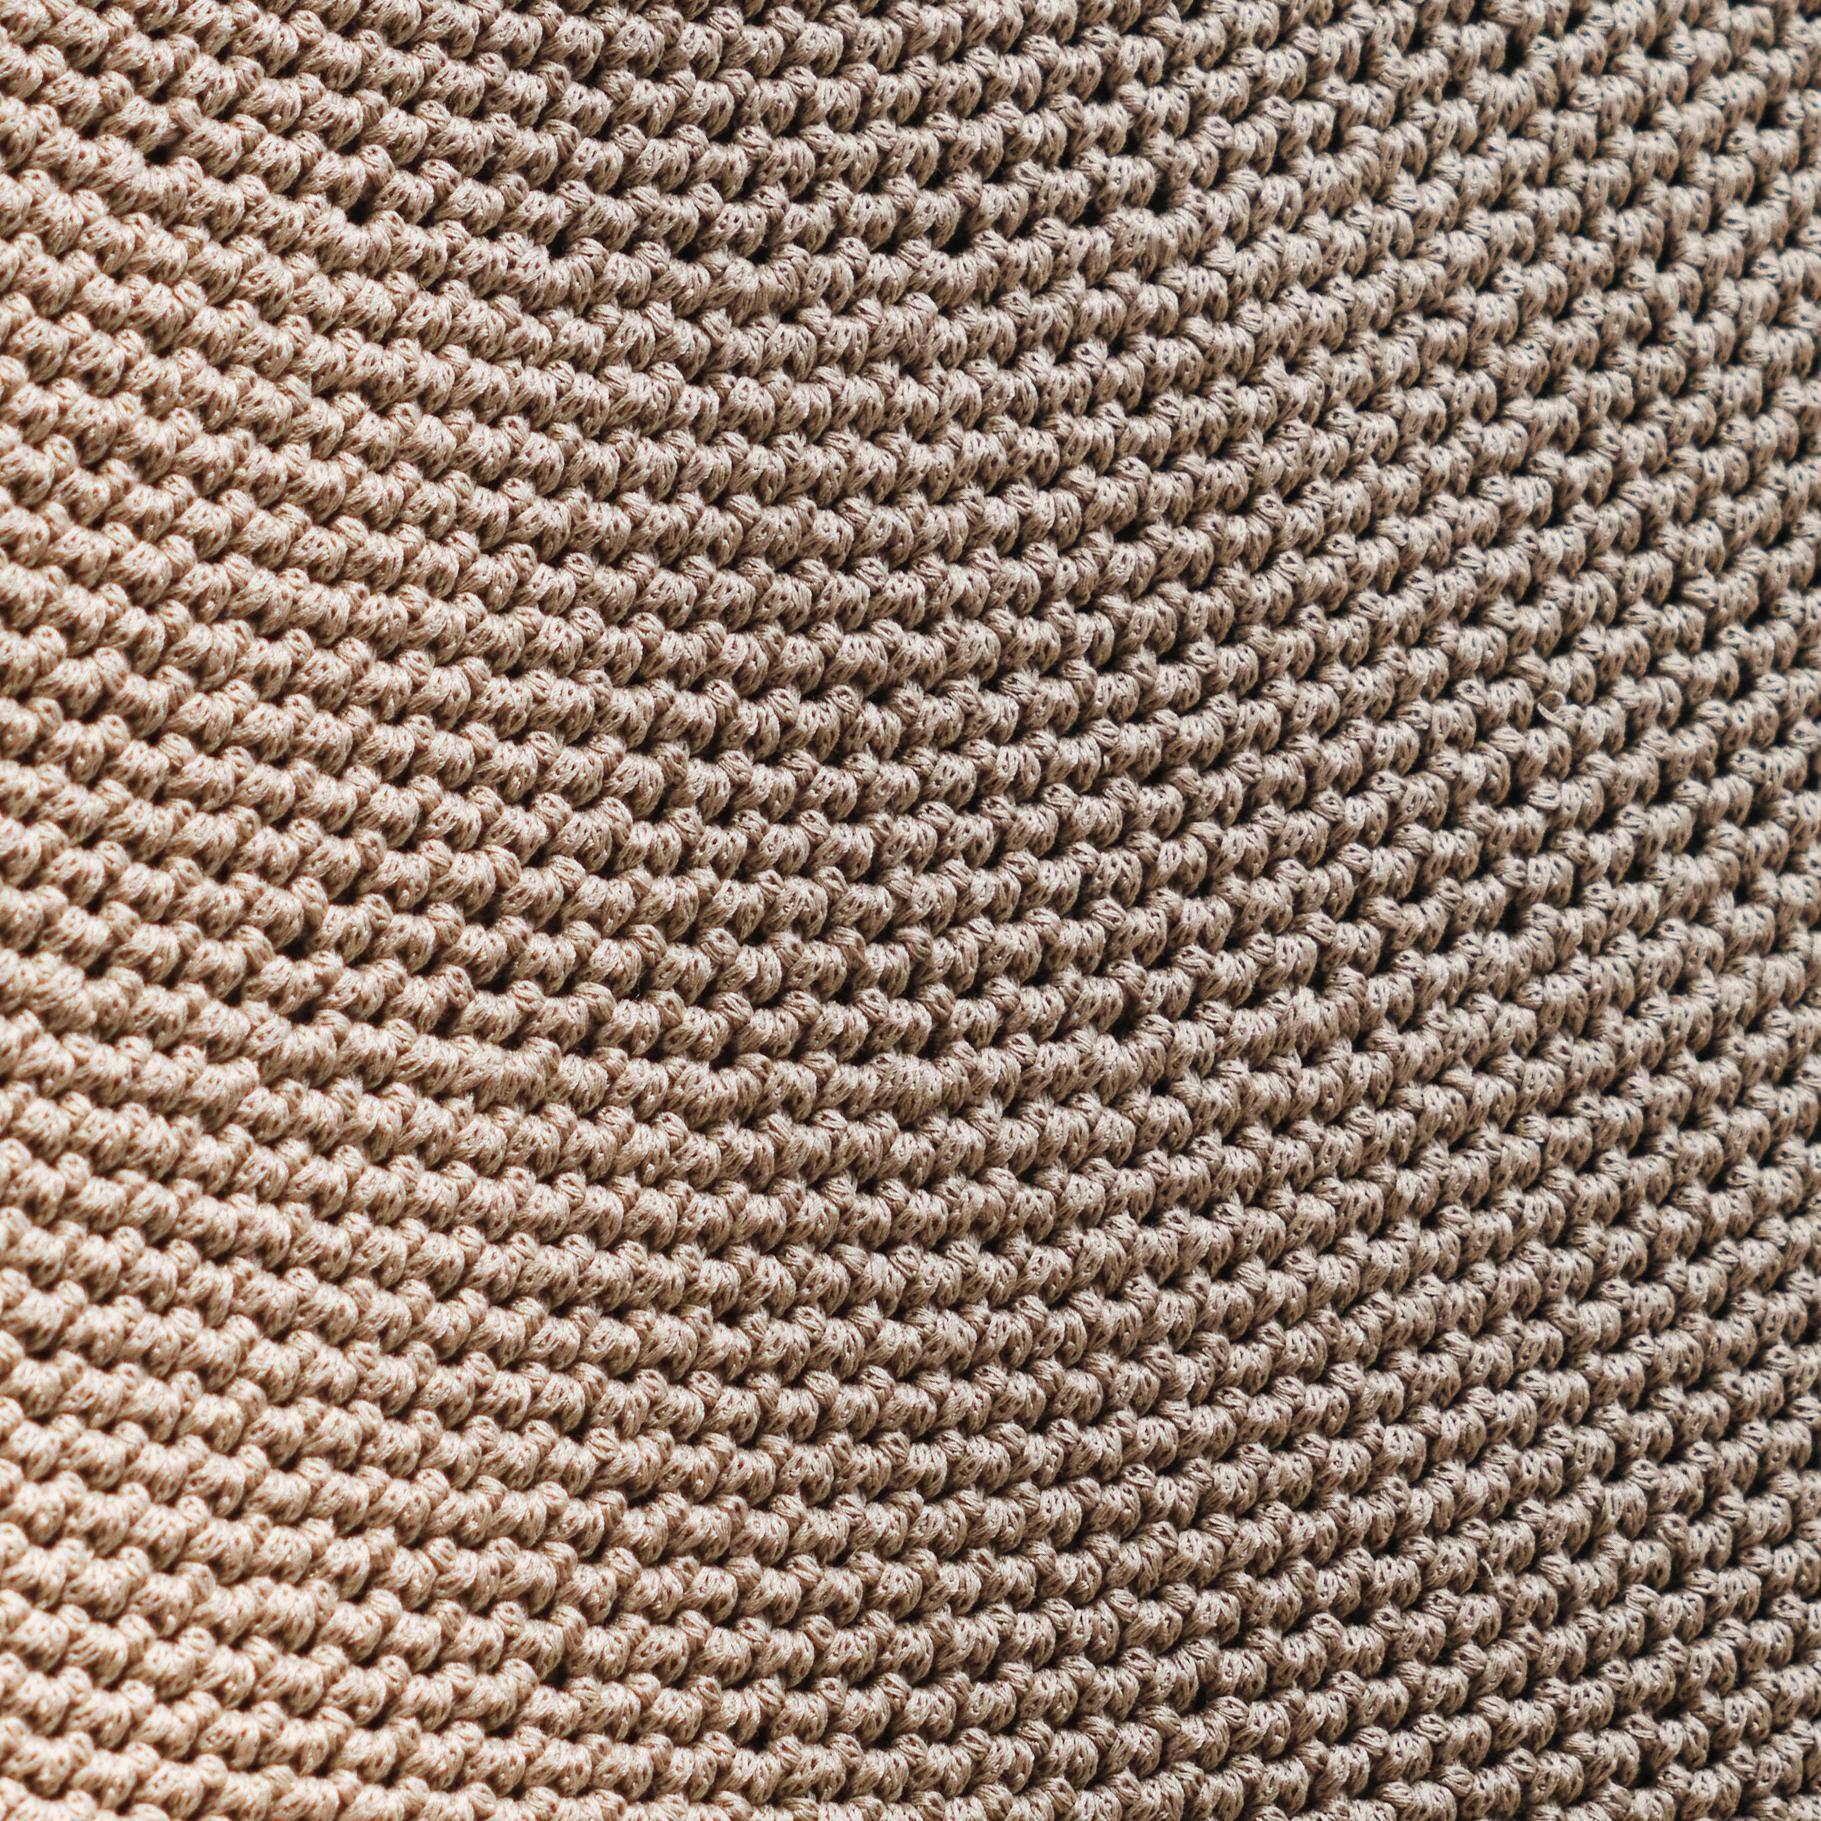 British SS03 Pendant Light Ø80cm/31.5in, Hand Crocheted in 100% Egyptian Cotton For Sale